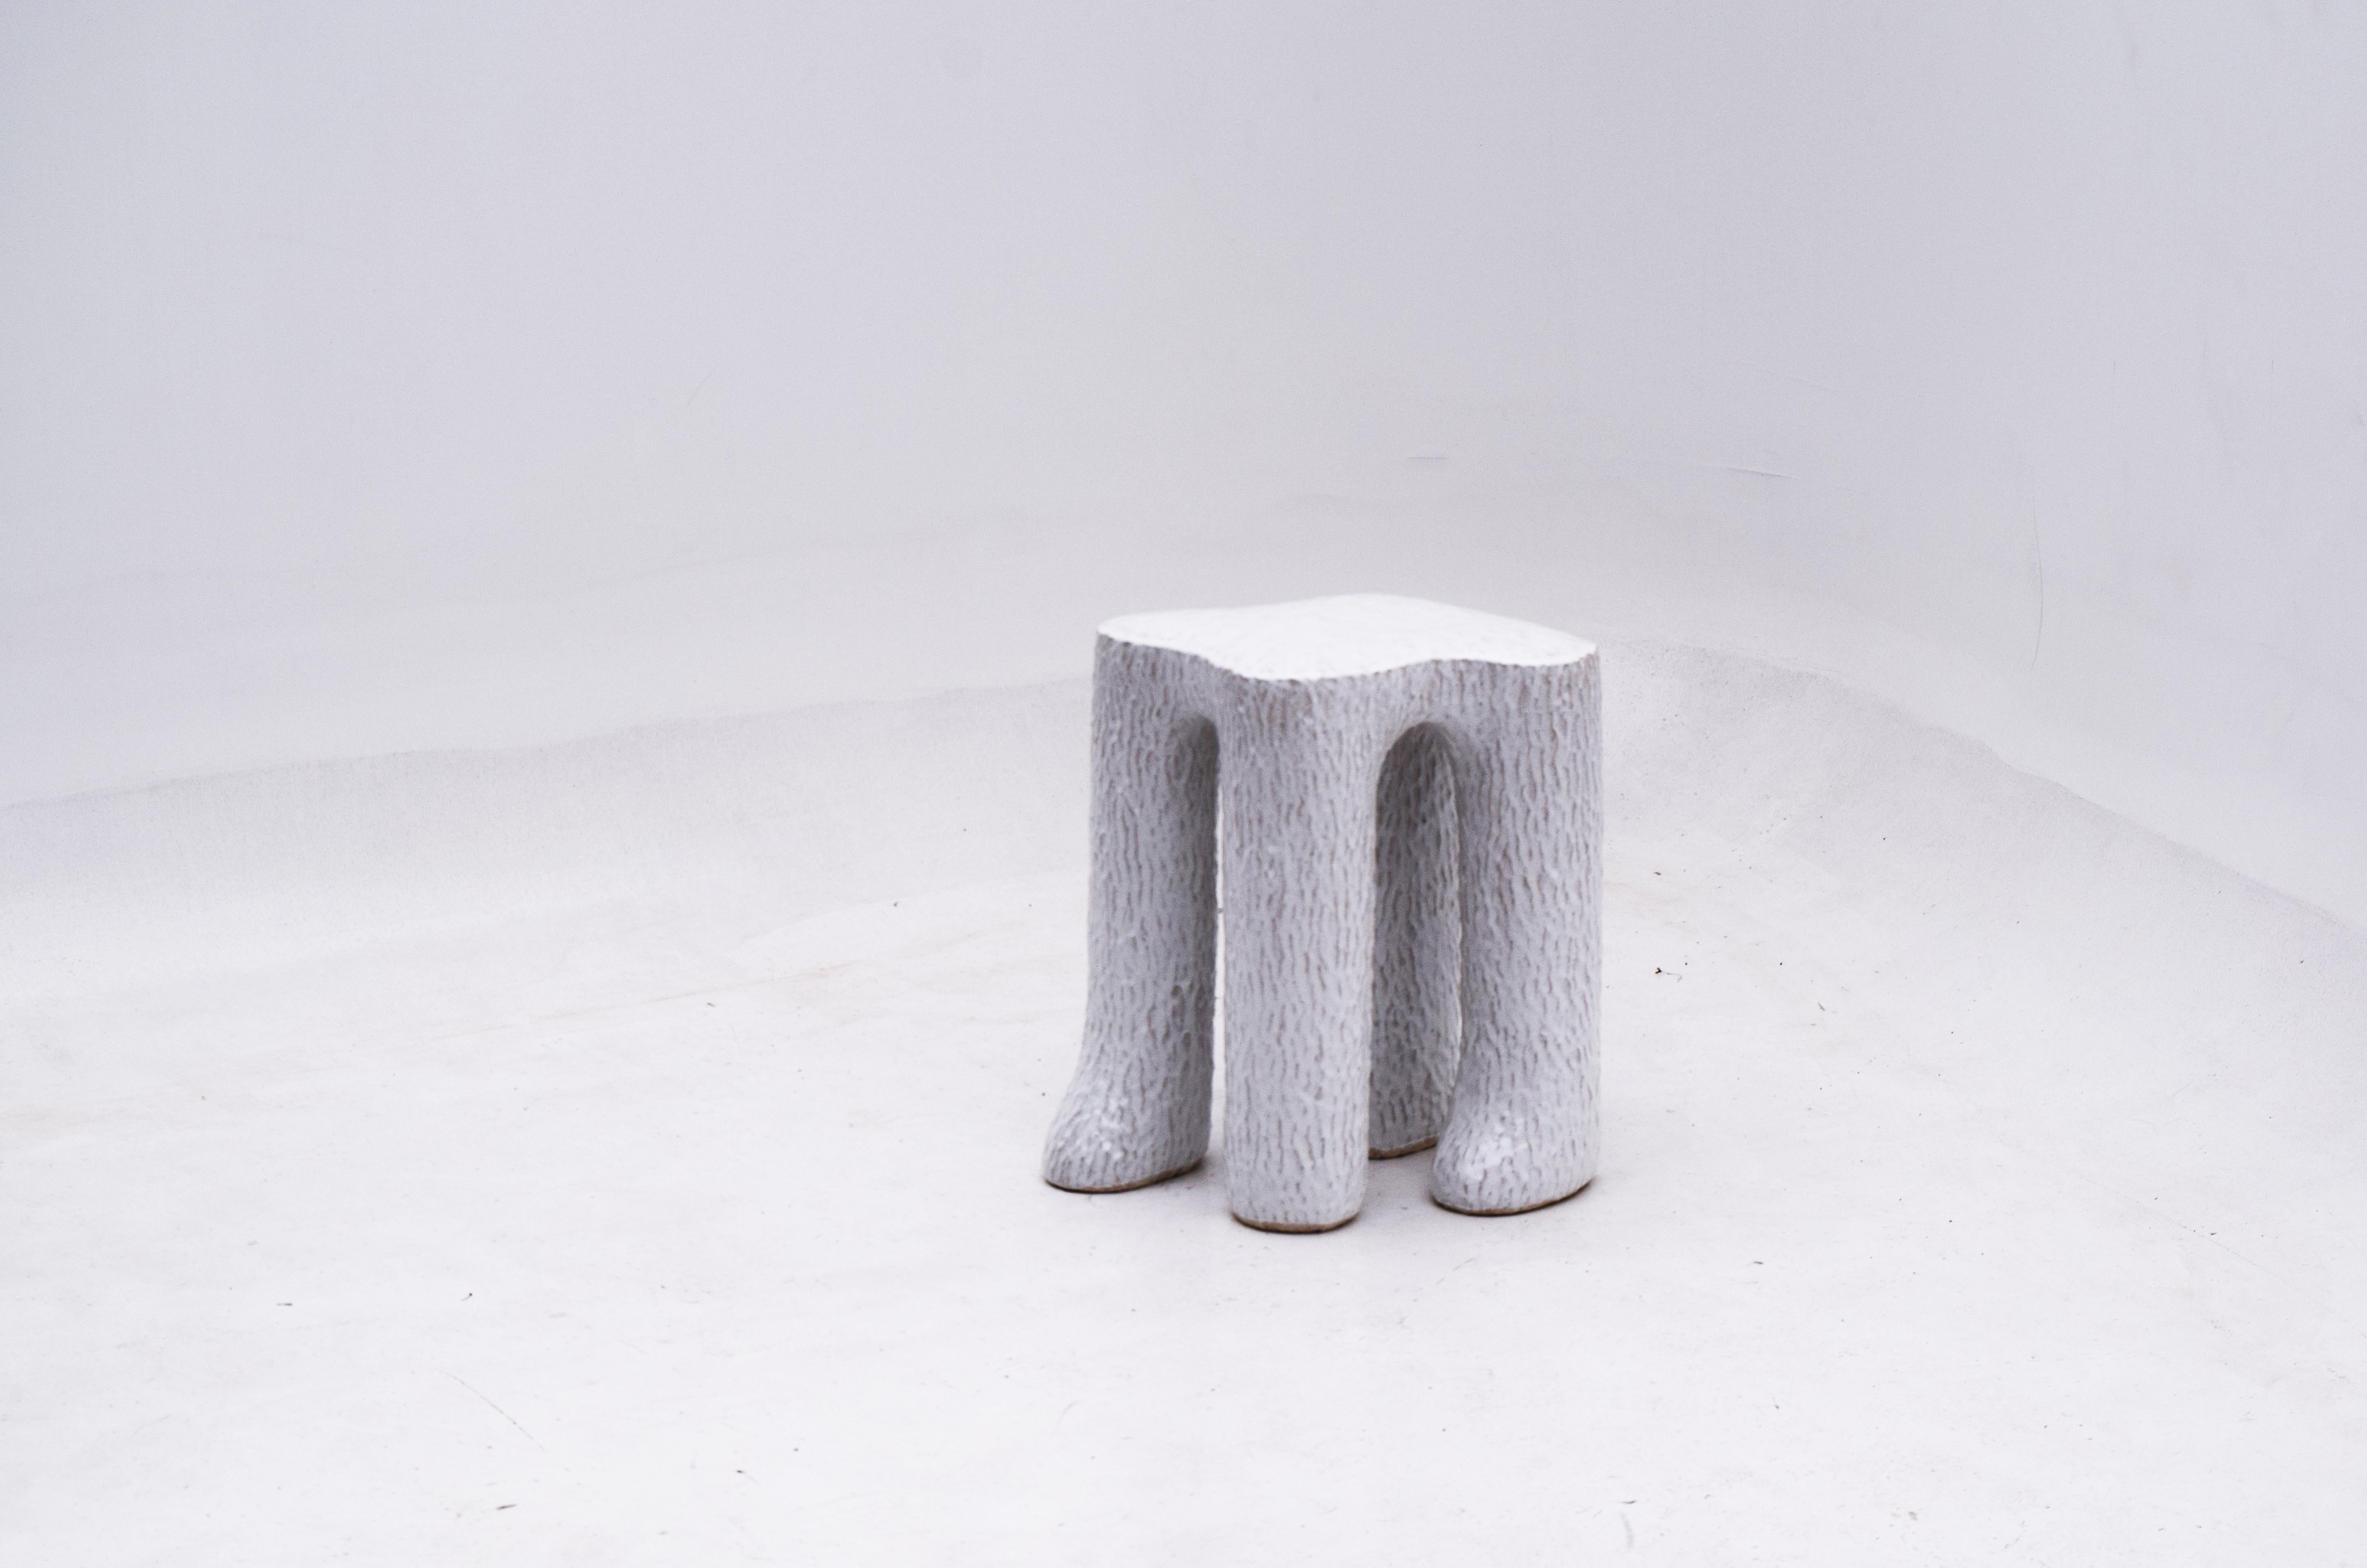 The Pillar series is a series of hand-built stools/ side tables in ceramic 

Dimension:
40 x 40 x 50cm H

Using stoneware and sand finishing material/ hand building techniques of ceramic.

Additional info:
The wooden box is included in the